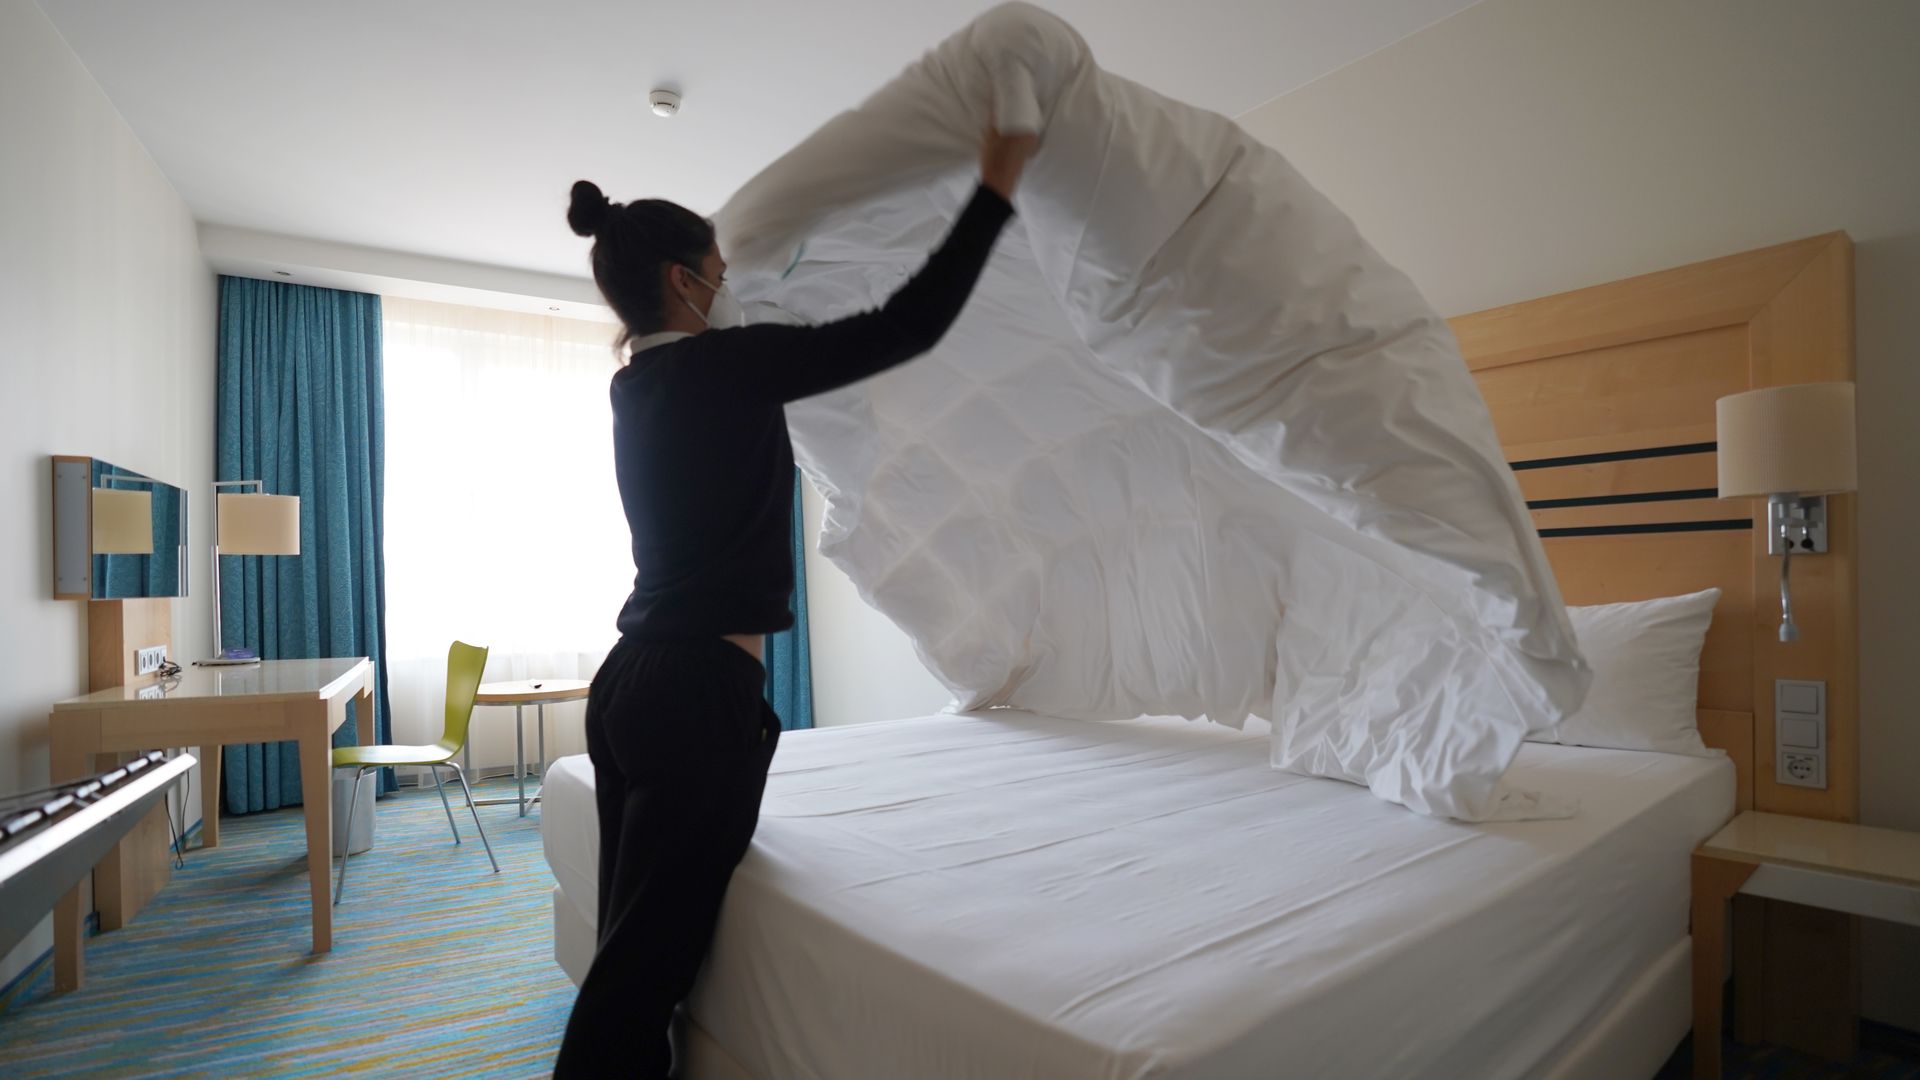 A hotel housekeeper puts a sheet on a bed